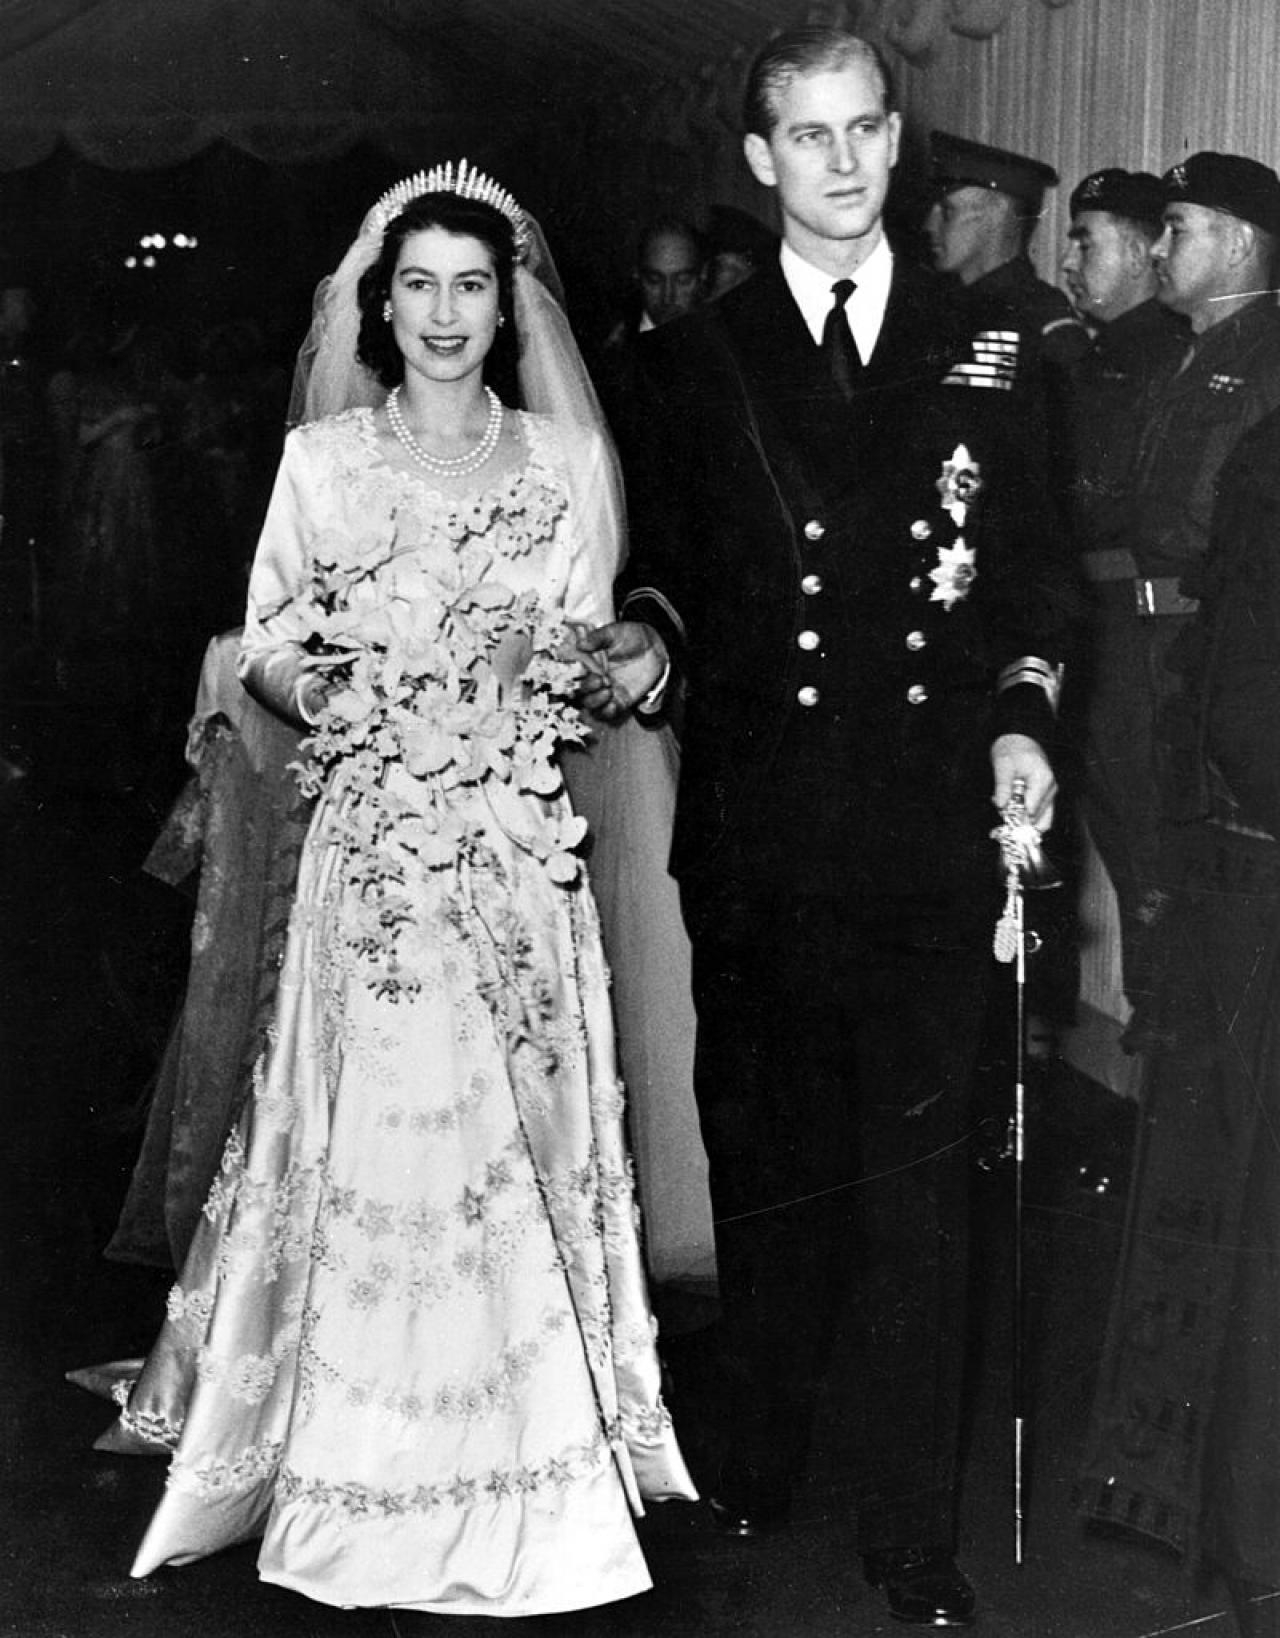 Queen Elizabeth II, as Princess Elizabeth, and her husband the Duke of Edinburgh, styled Prince Philip in 1957, on their wedding day. She became queen on her father King George VI's death in 1952.   (Photo by Hulton Archive/Getty Images)